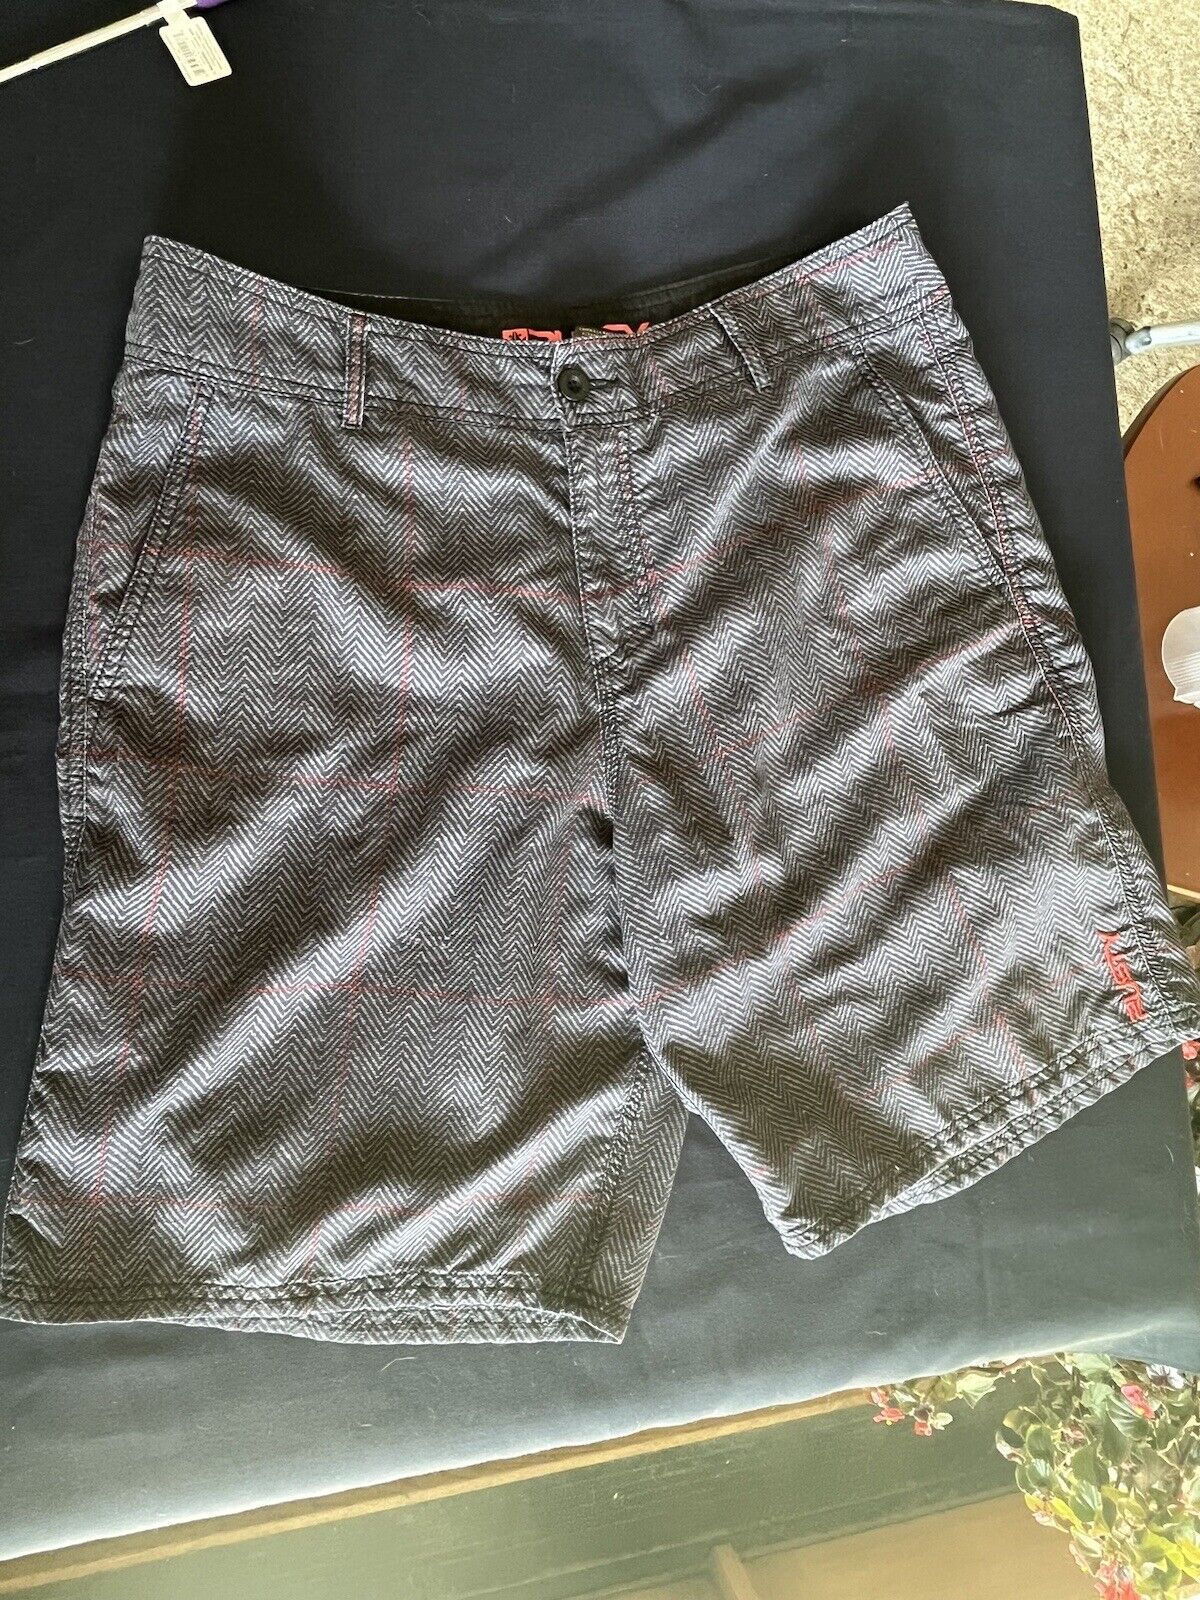 RUSTY BRAND-BOARD SHORTS 34 EXCELLENT CONDITION - image 1